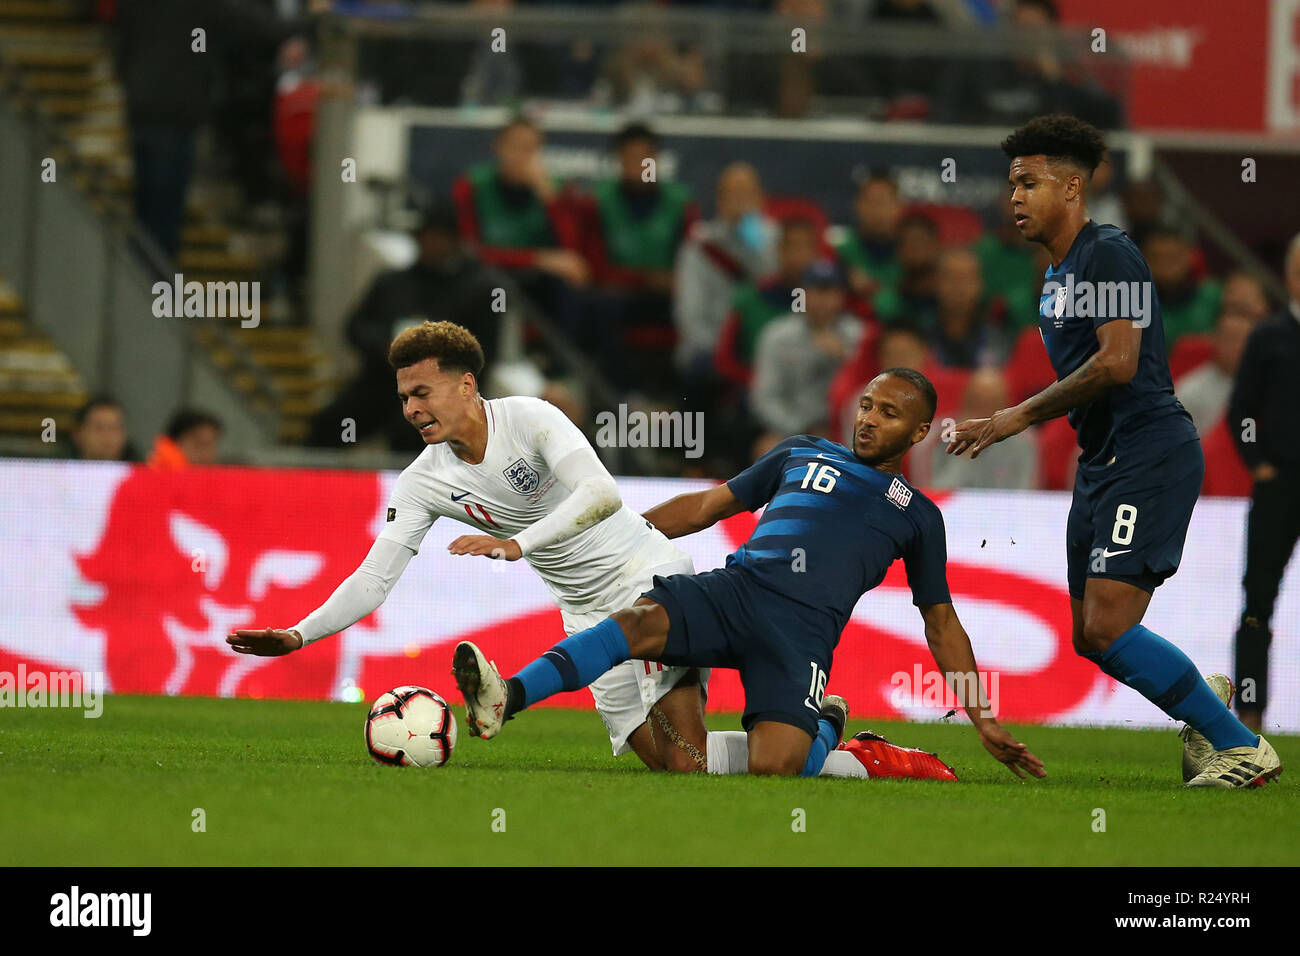 London Uk 15th Nov 2018 Dele Alli Of England Is Fouled By Julian Green Of Usa International Football Friendly Match England V Usa At Wembley Stadium In London On Thursday 15th November